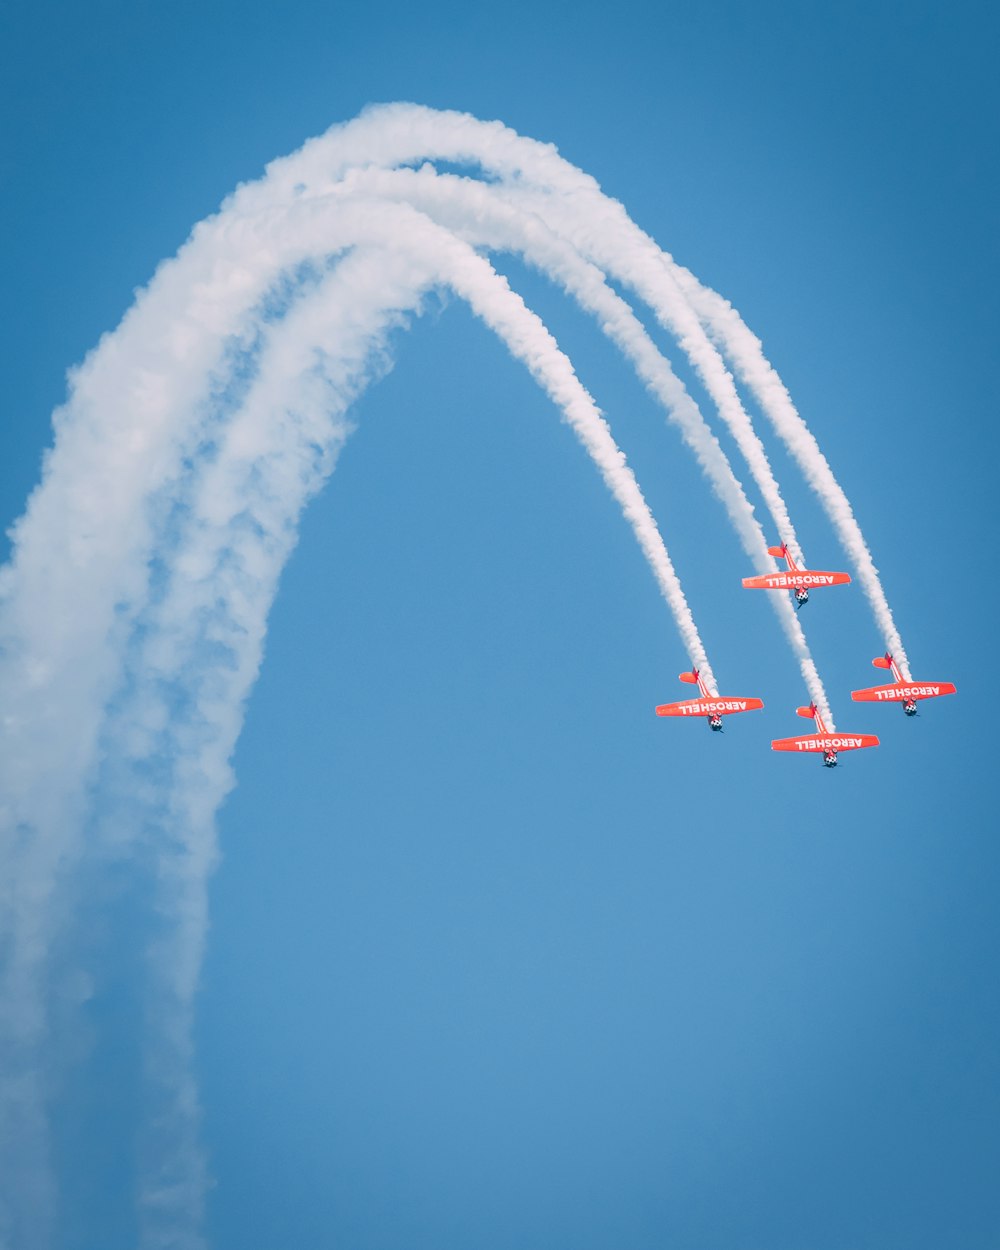 four red-and-white planes under clear blue sky